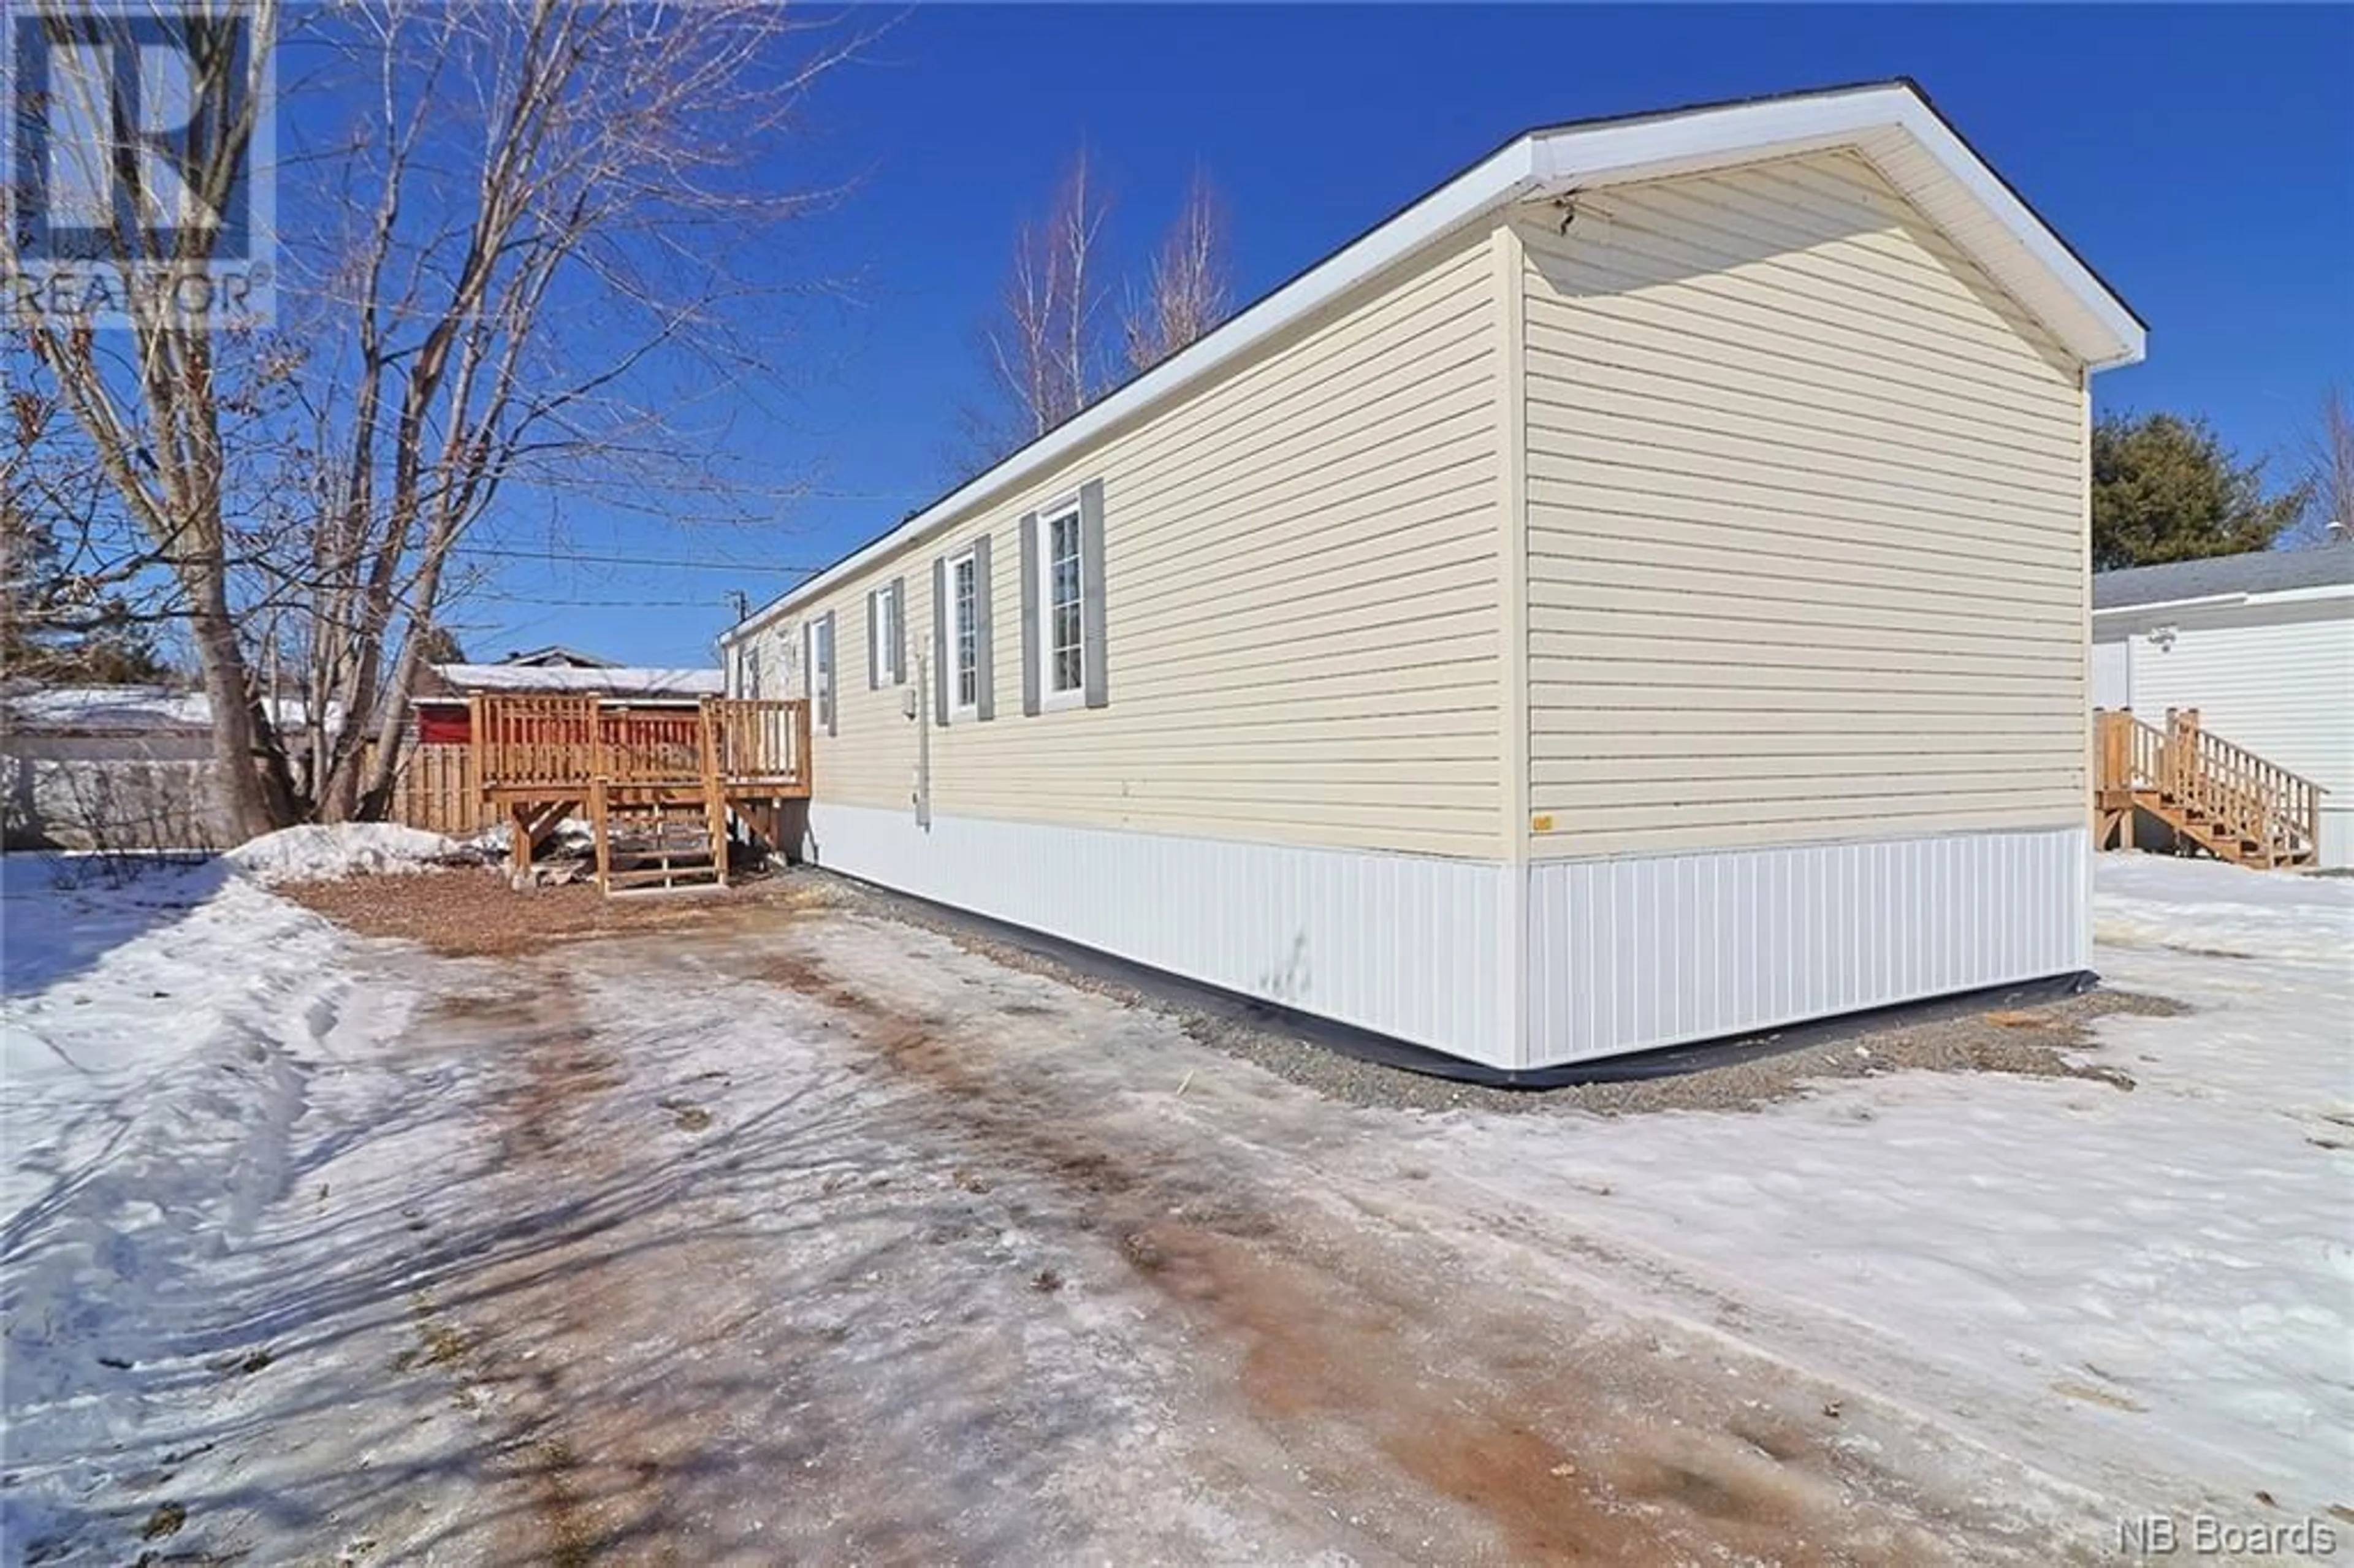 Home with vinyl exterior material for 193 Mcgee Drive, Fredericton New Brunswick E3B8M1